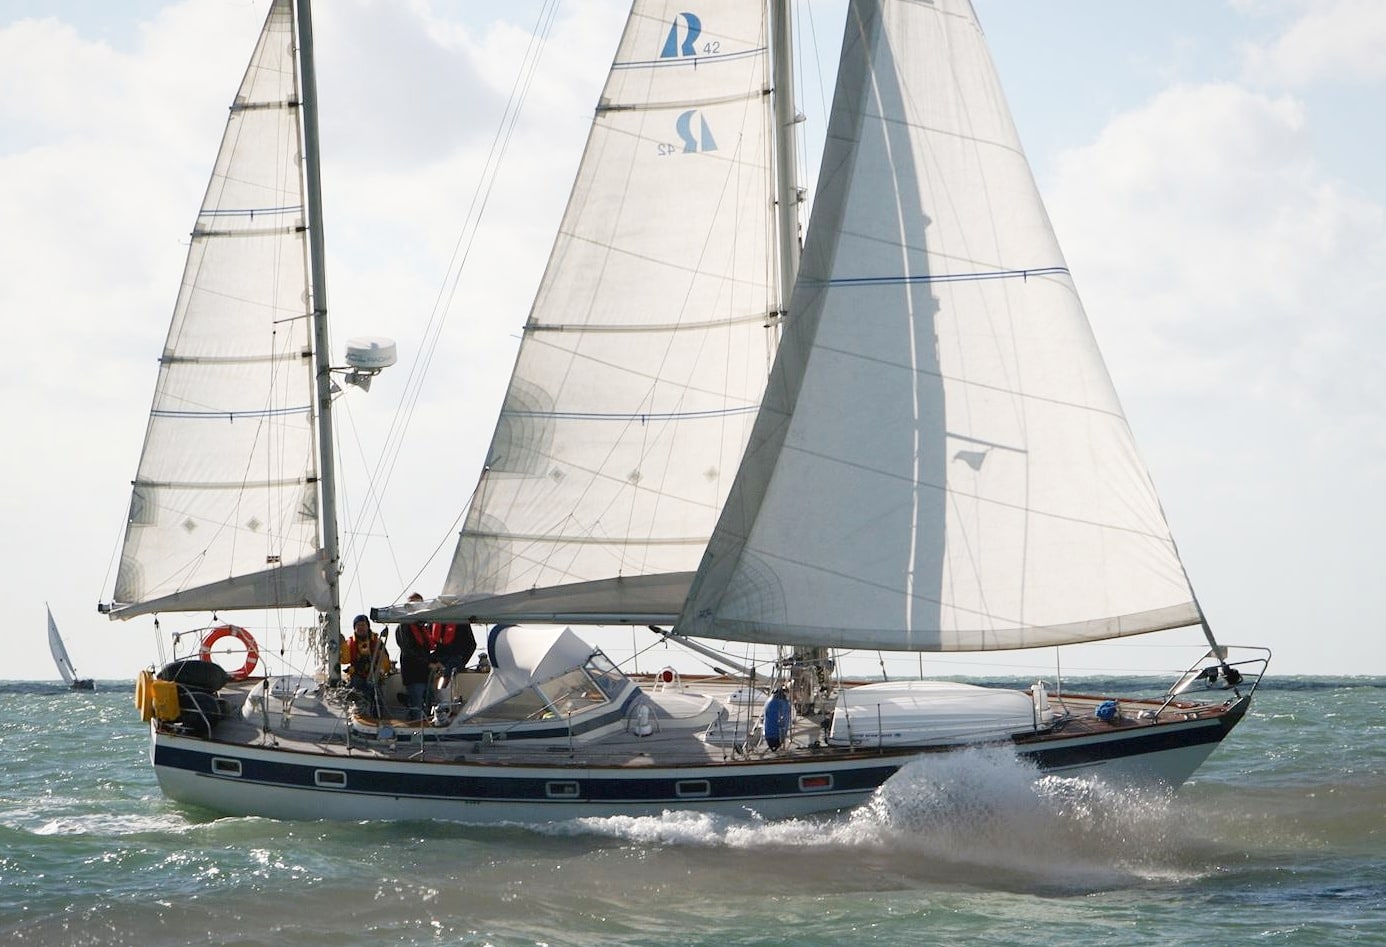 Hallberg Rassy 42 yacht sailing under full sail on delivery to Amsterdam